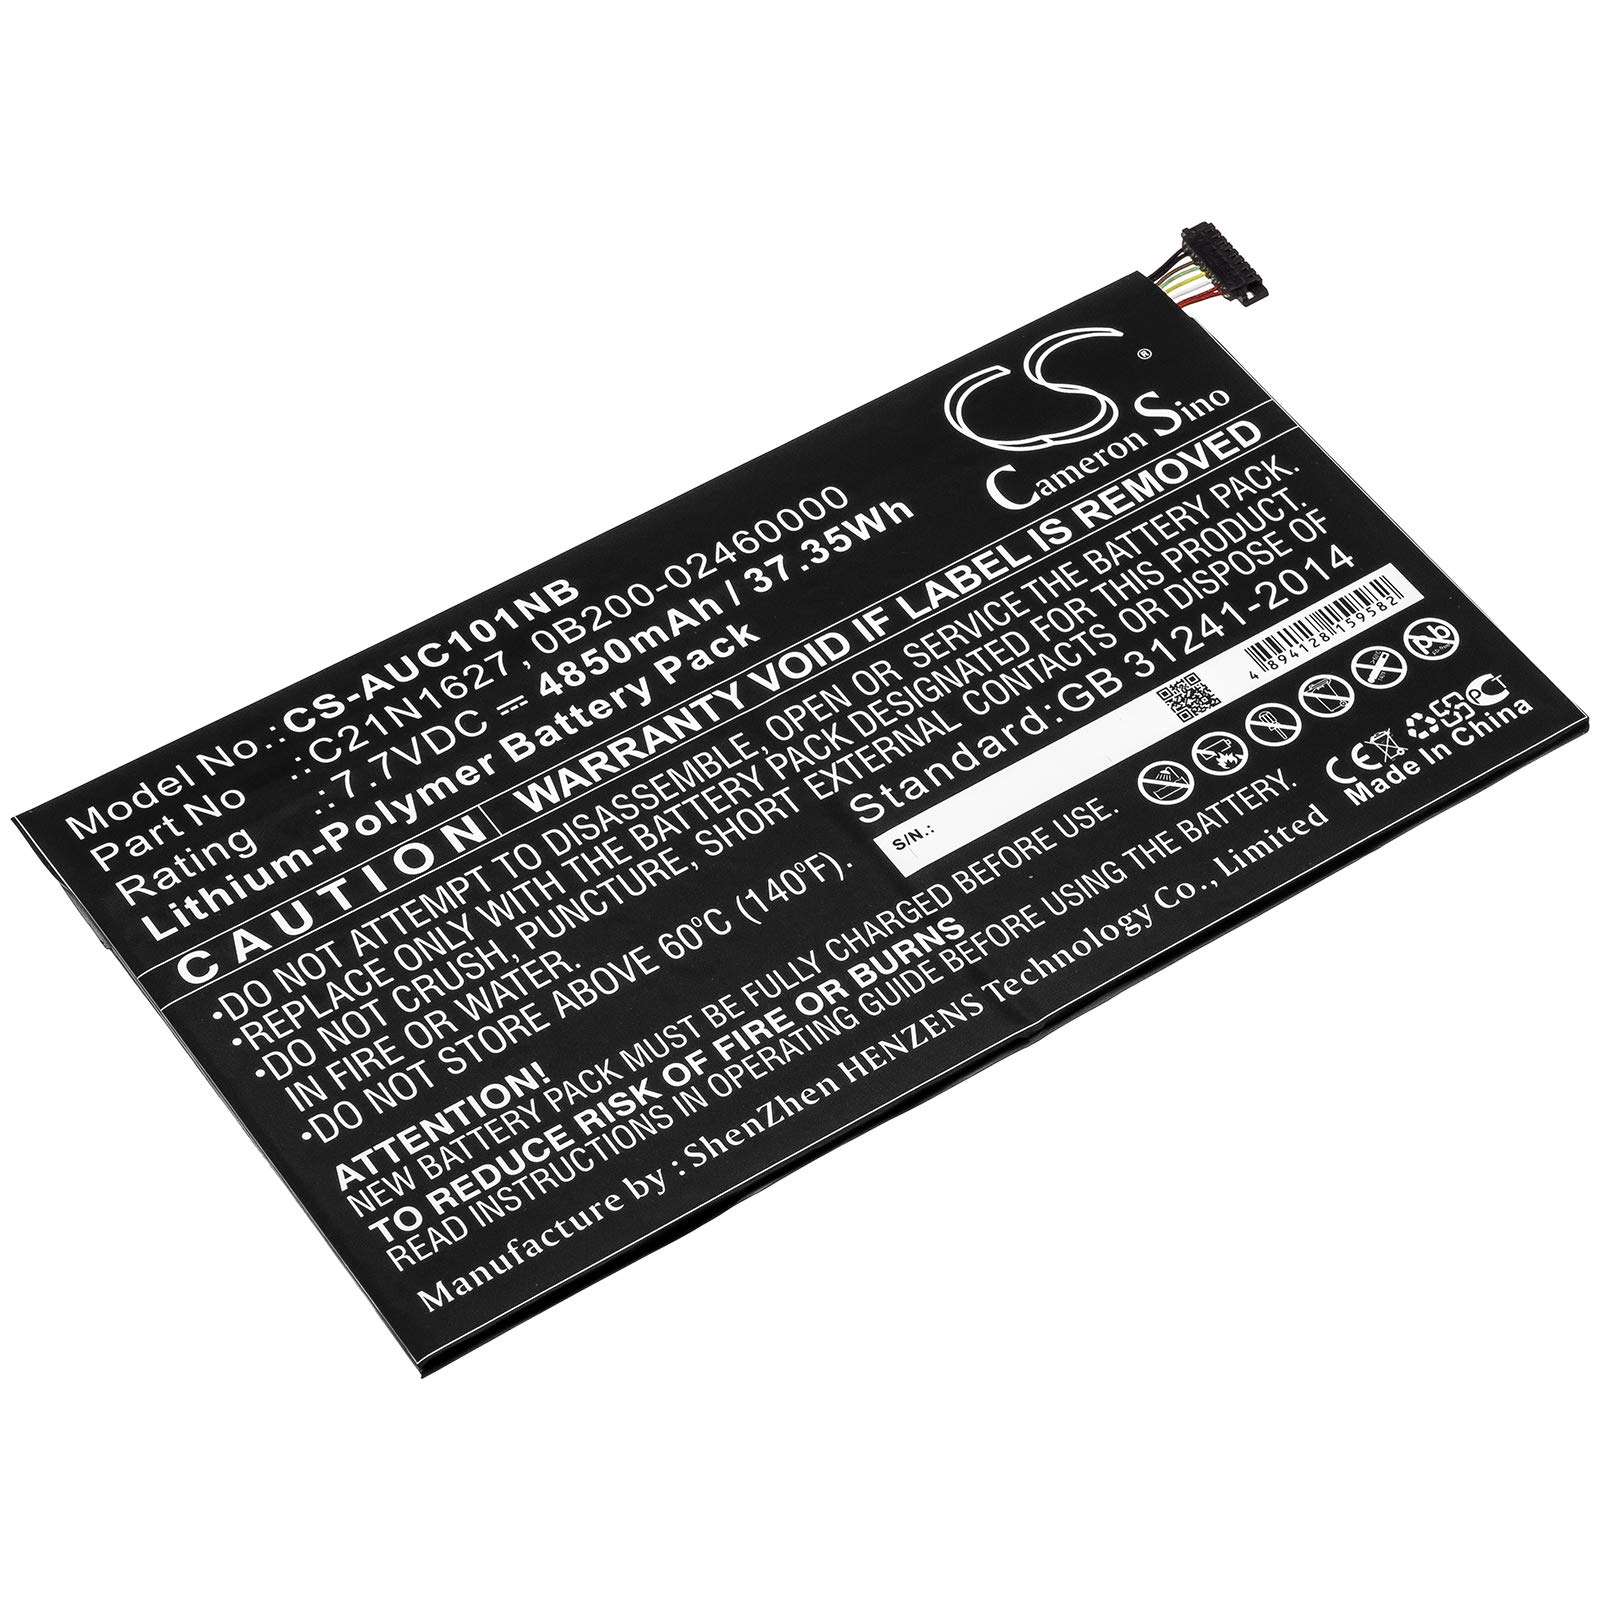 7.7V 0B200-02460000 C21N1627 Battery Replacement for as Chromebook Flip C101PA-DB02 Chromebook Flip C101PA-FS002 C101PA Chromebook Flip C101PA-OP1 ...